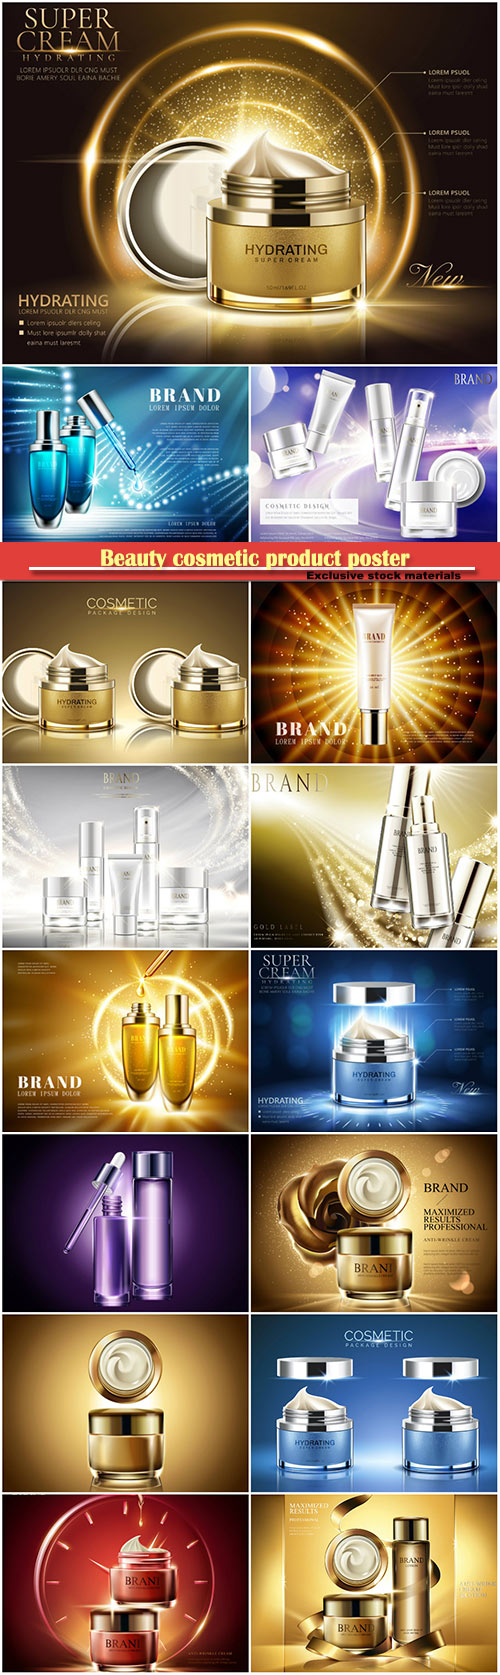 Beauty cosmetic product poster, anti-wrinkle cream ads, background in 3d il ...